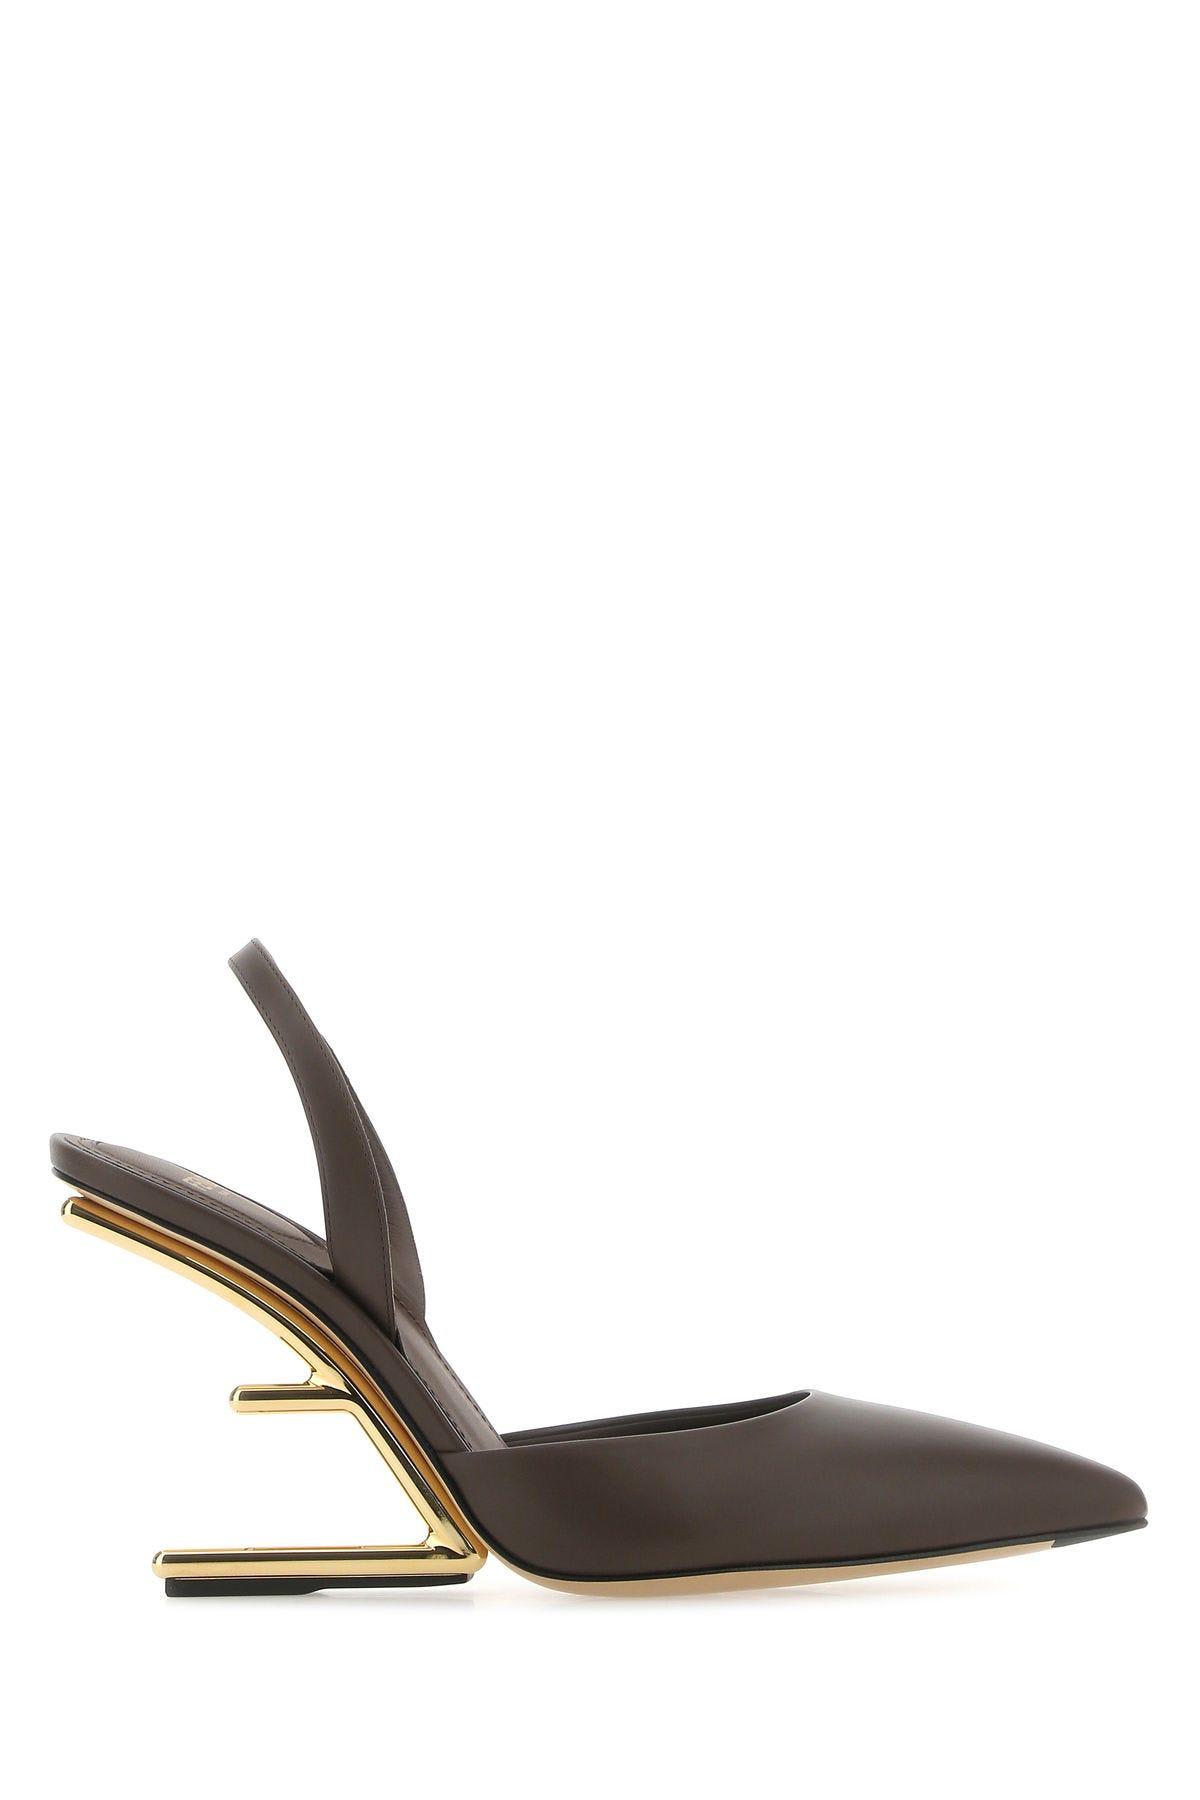 FENDI CHOCOLATE LEATHER FIRST PUMPS